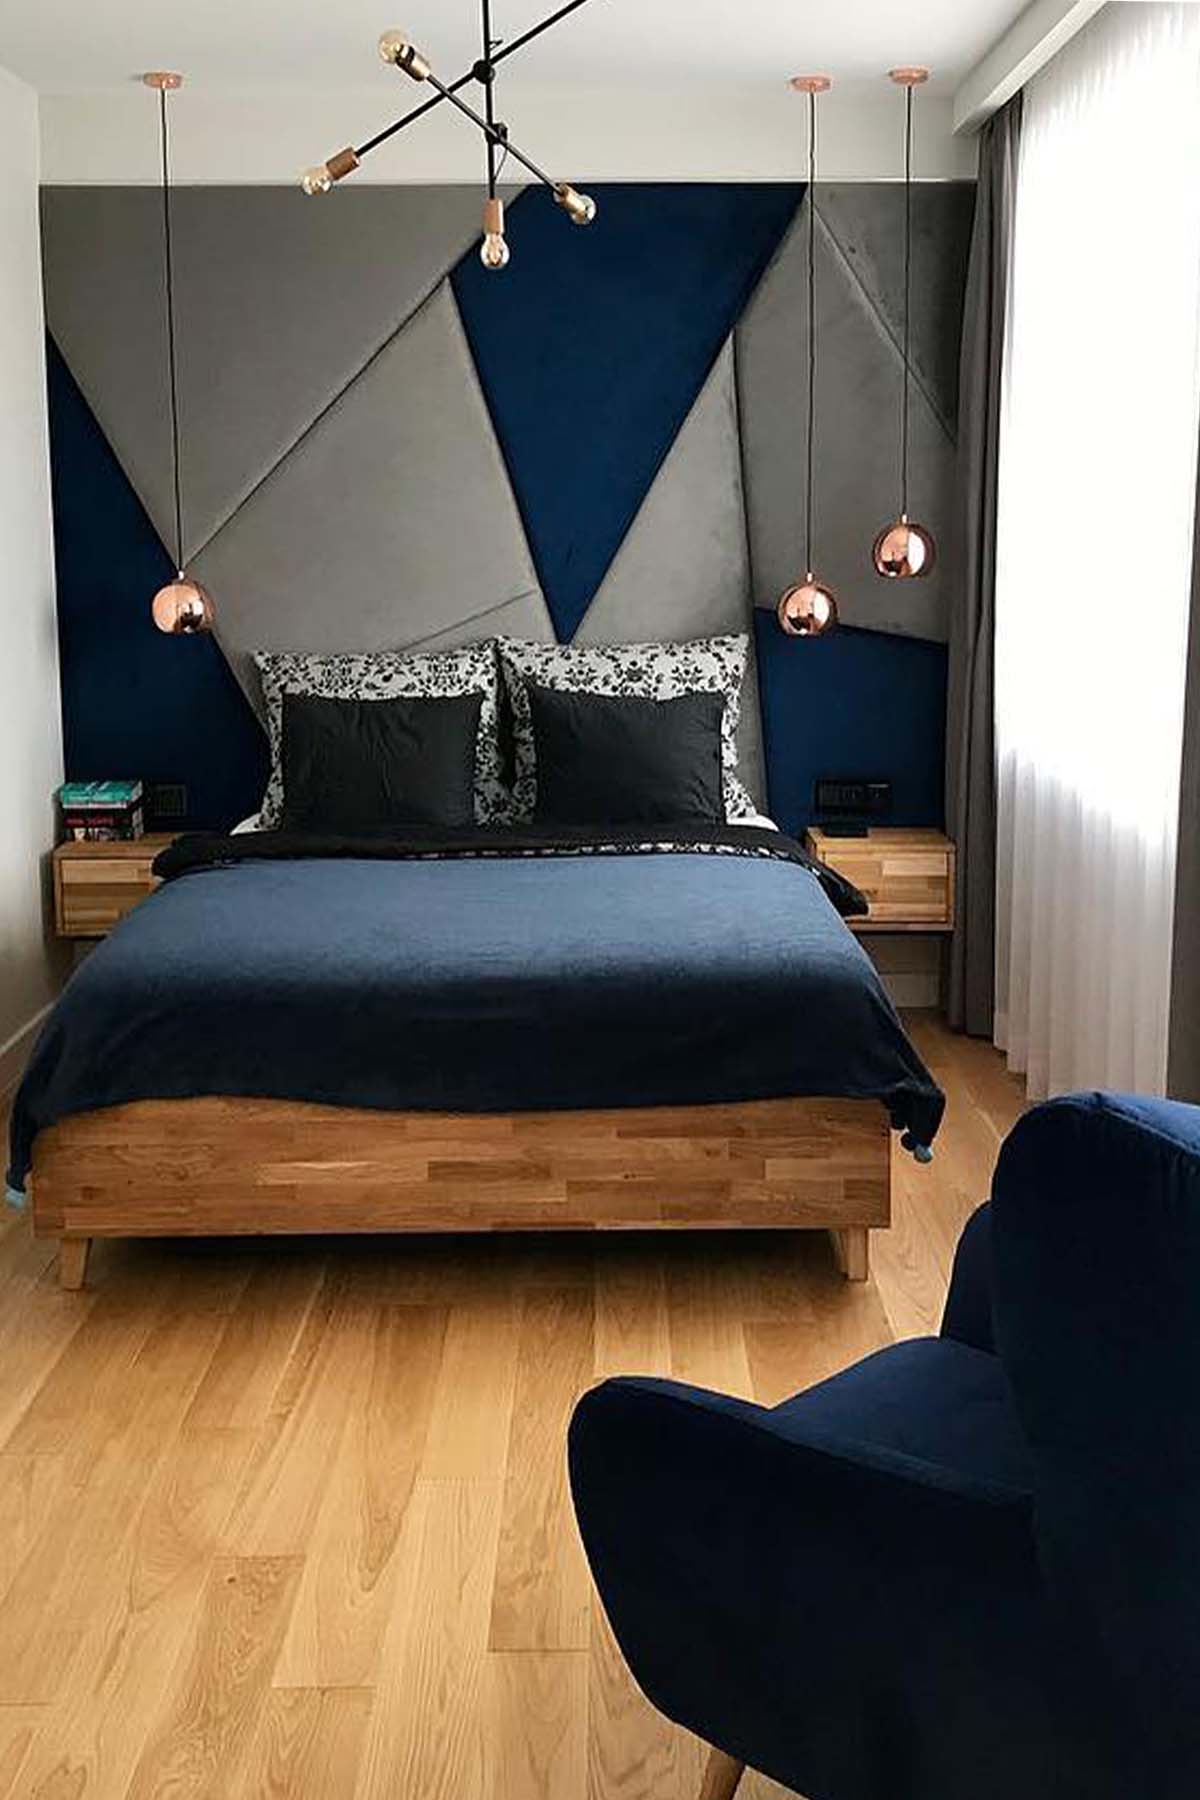 Navy blue bedroom - what furniture will suit